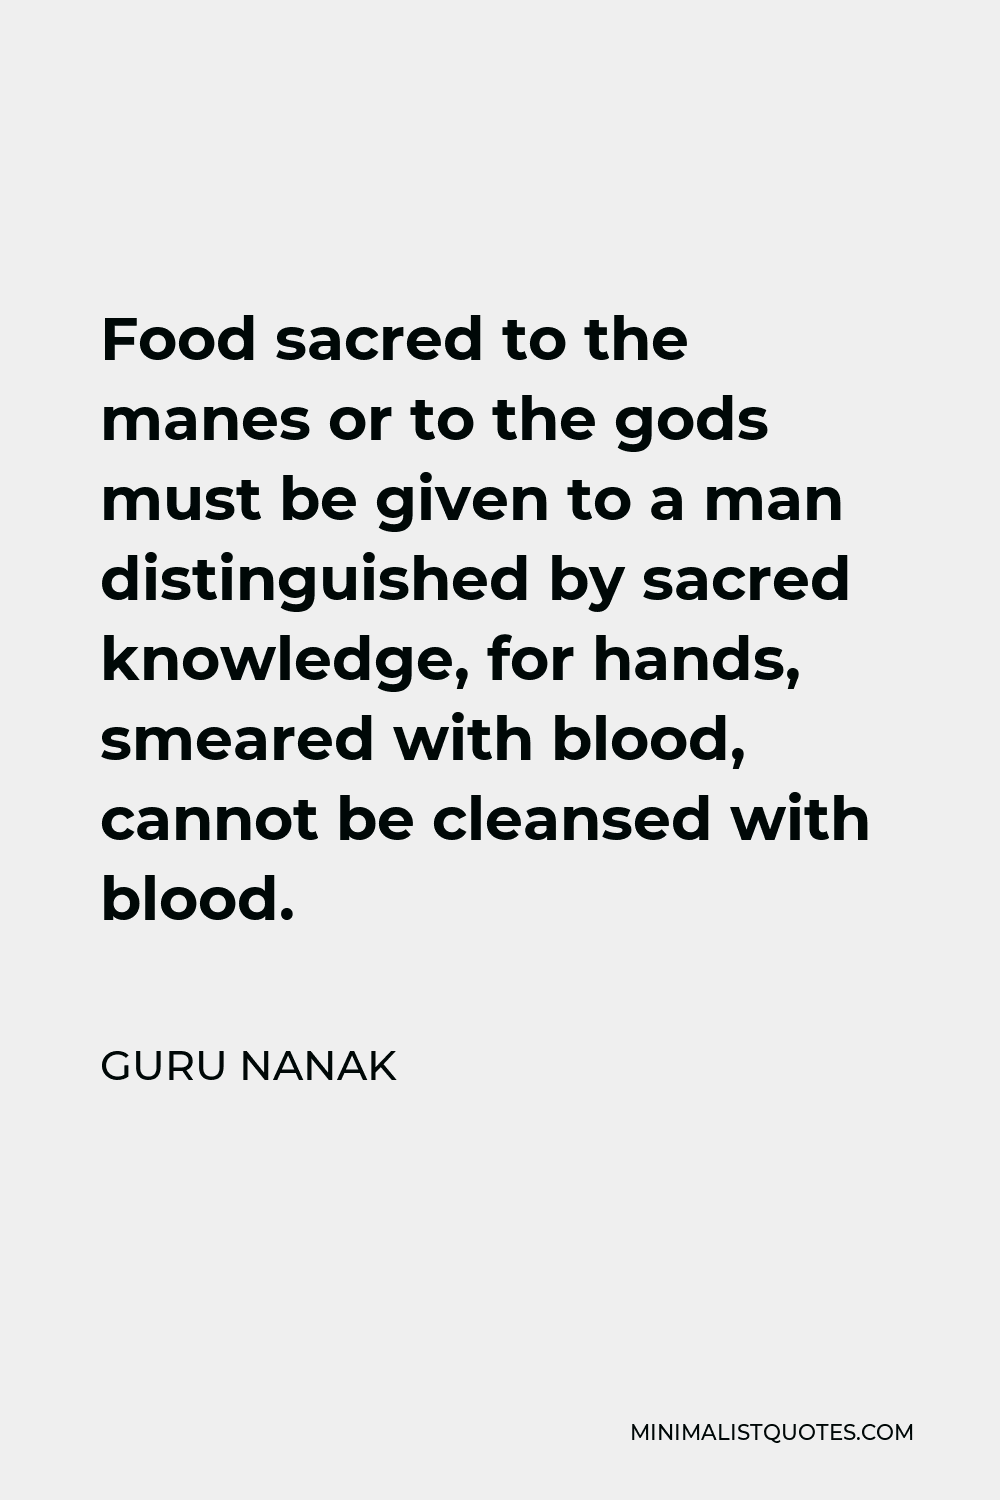 Guru Nanak Quote - Food sacred to the manes or to the gods must be given to a man distinguished by sacred knowledge, for hands, smeared with blood, cannot be cleansed with blood.